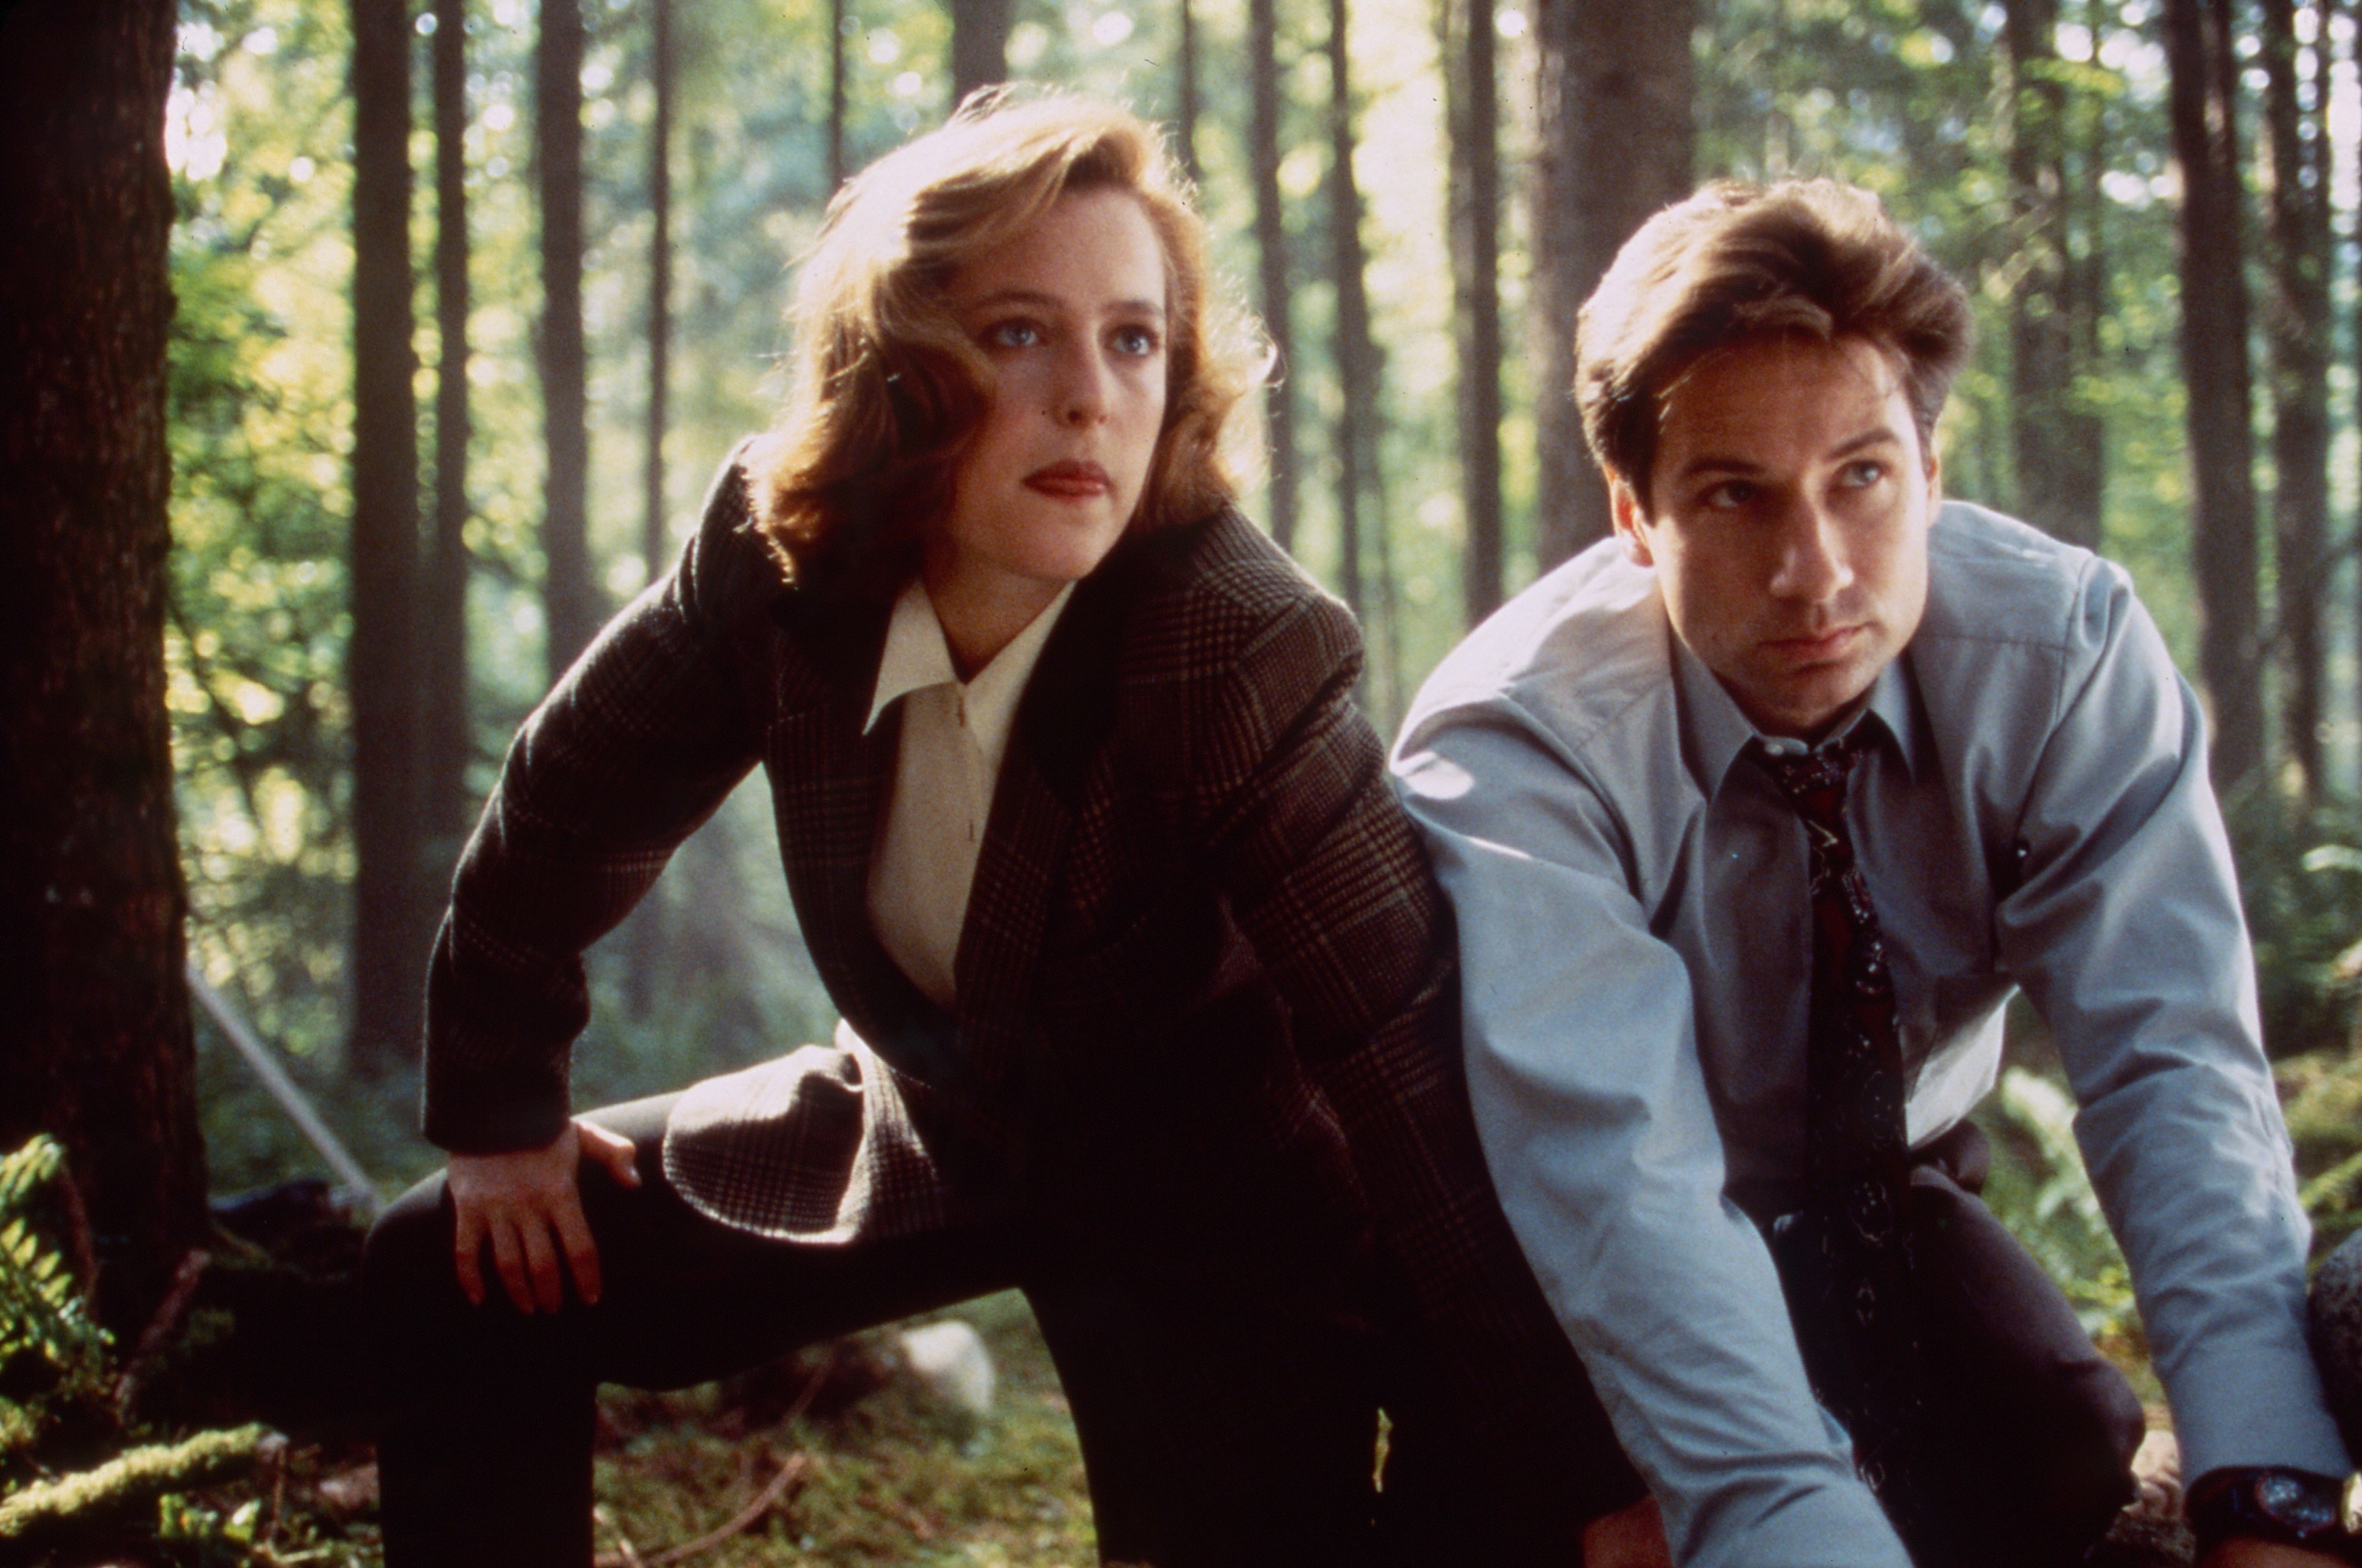 Agents Mulder and Scully in the woods